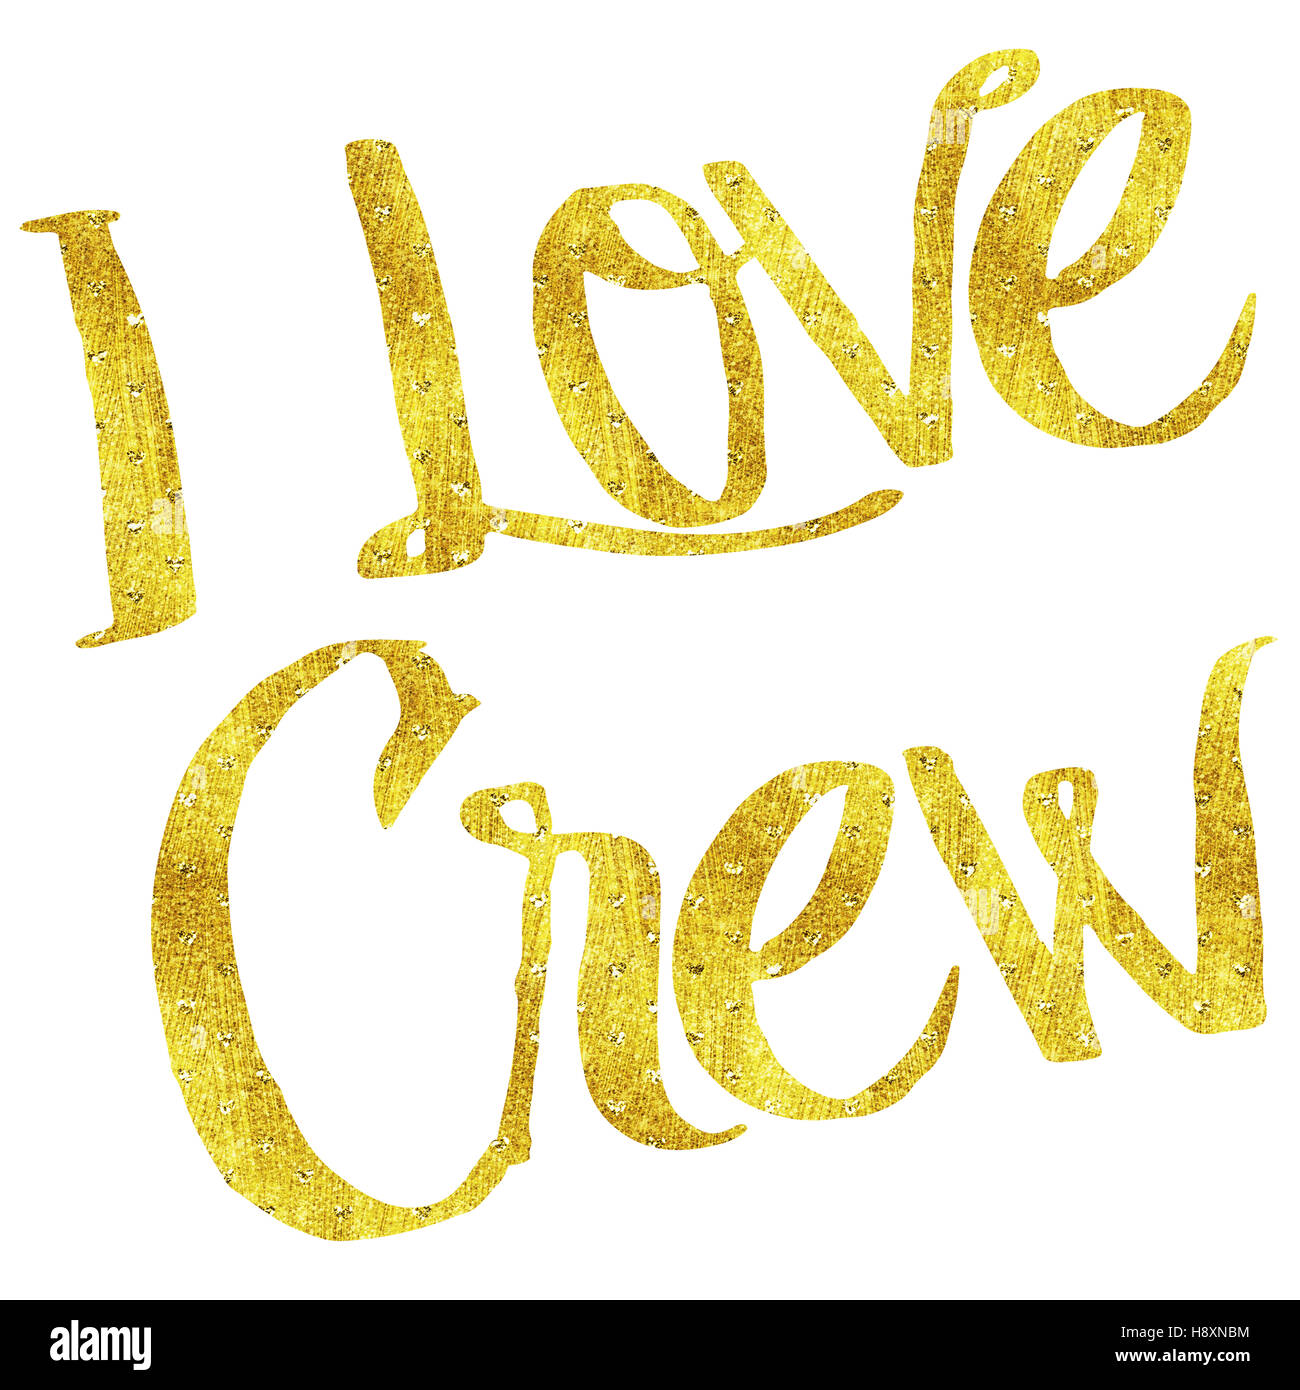 I Love Crew Gold Faux Foil Metallic Motivational Quote Isolated Stock Photo